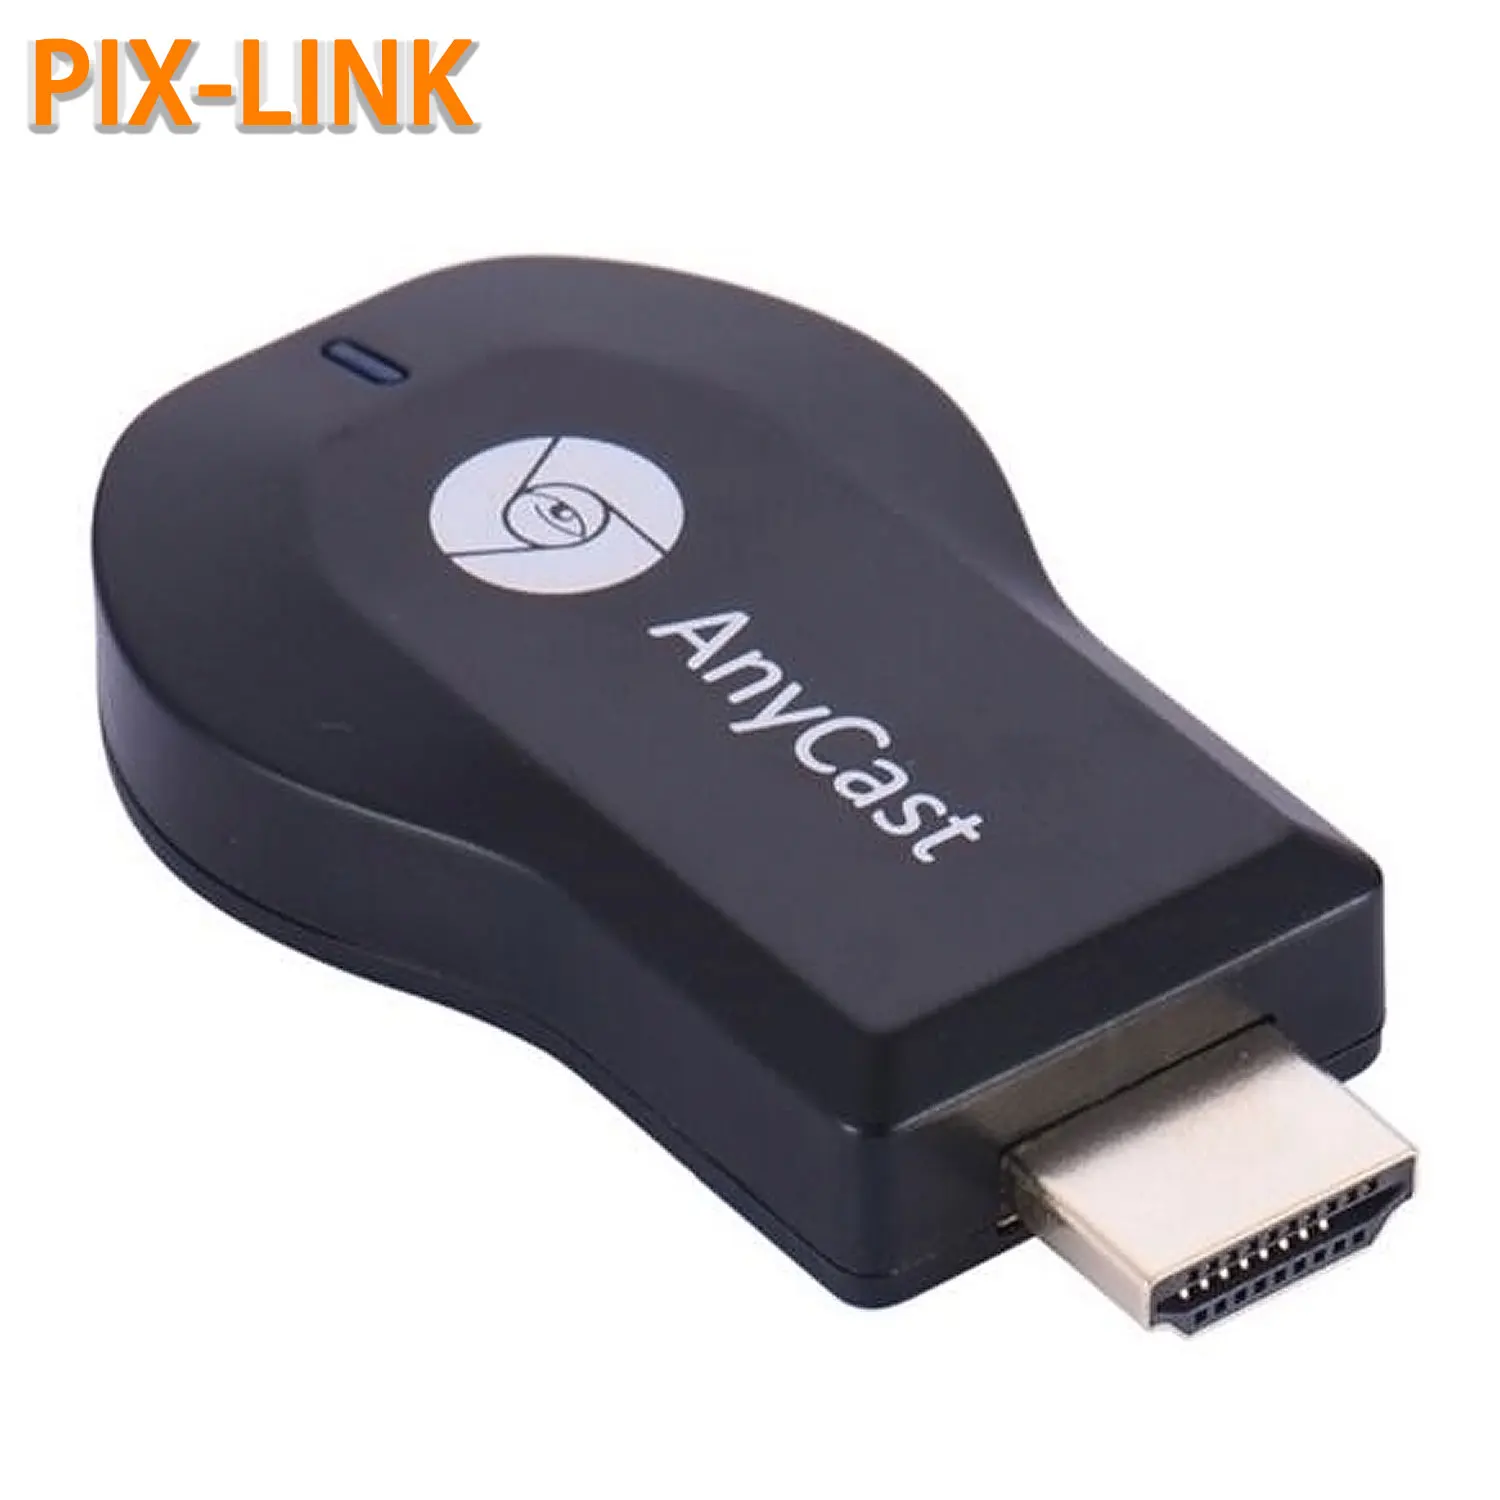 

1080P Wireless WiFi Display Dongle TV Stick Video Adapter Airplay DLNA Screen Mirroring Share for iOS Android Phone to TV